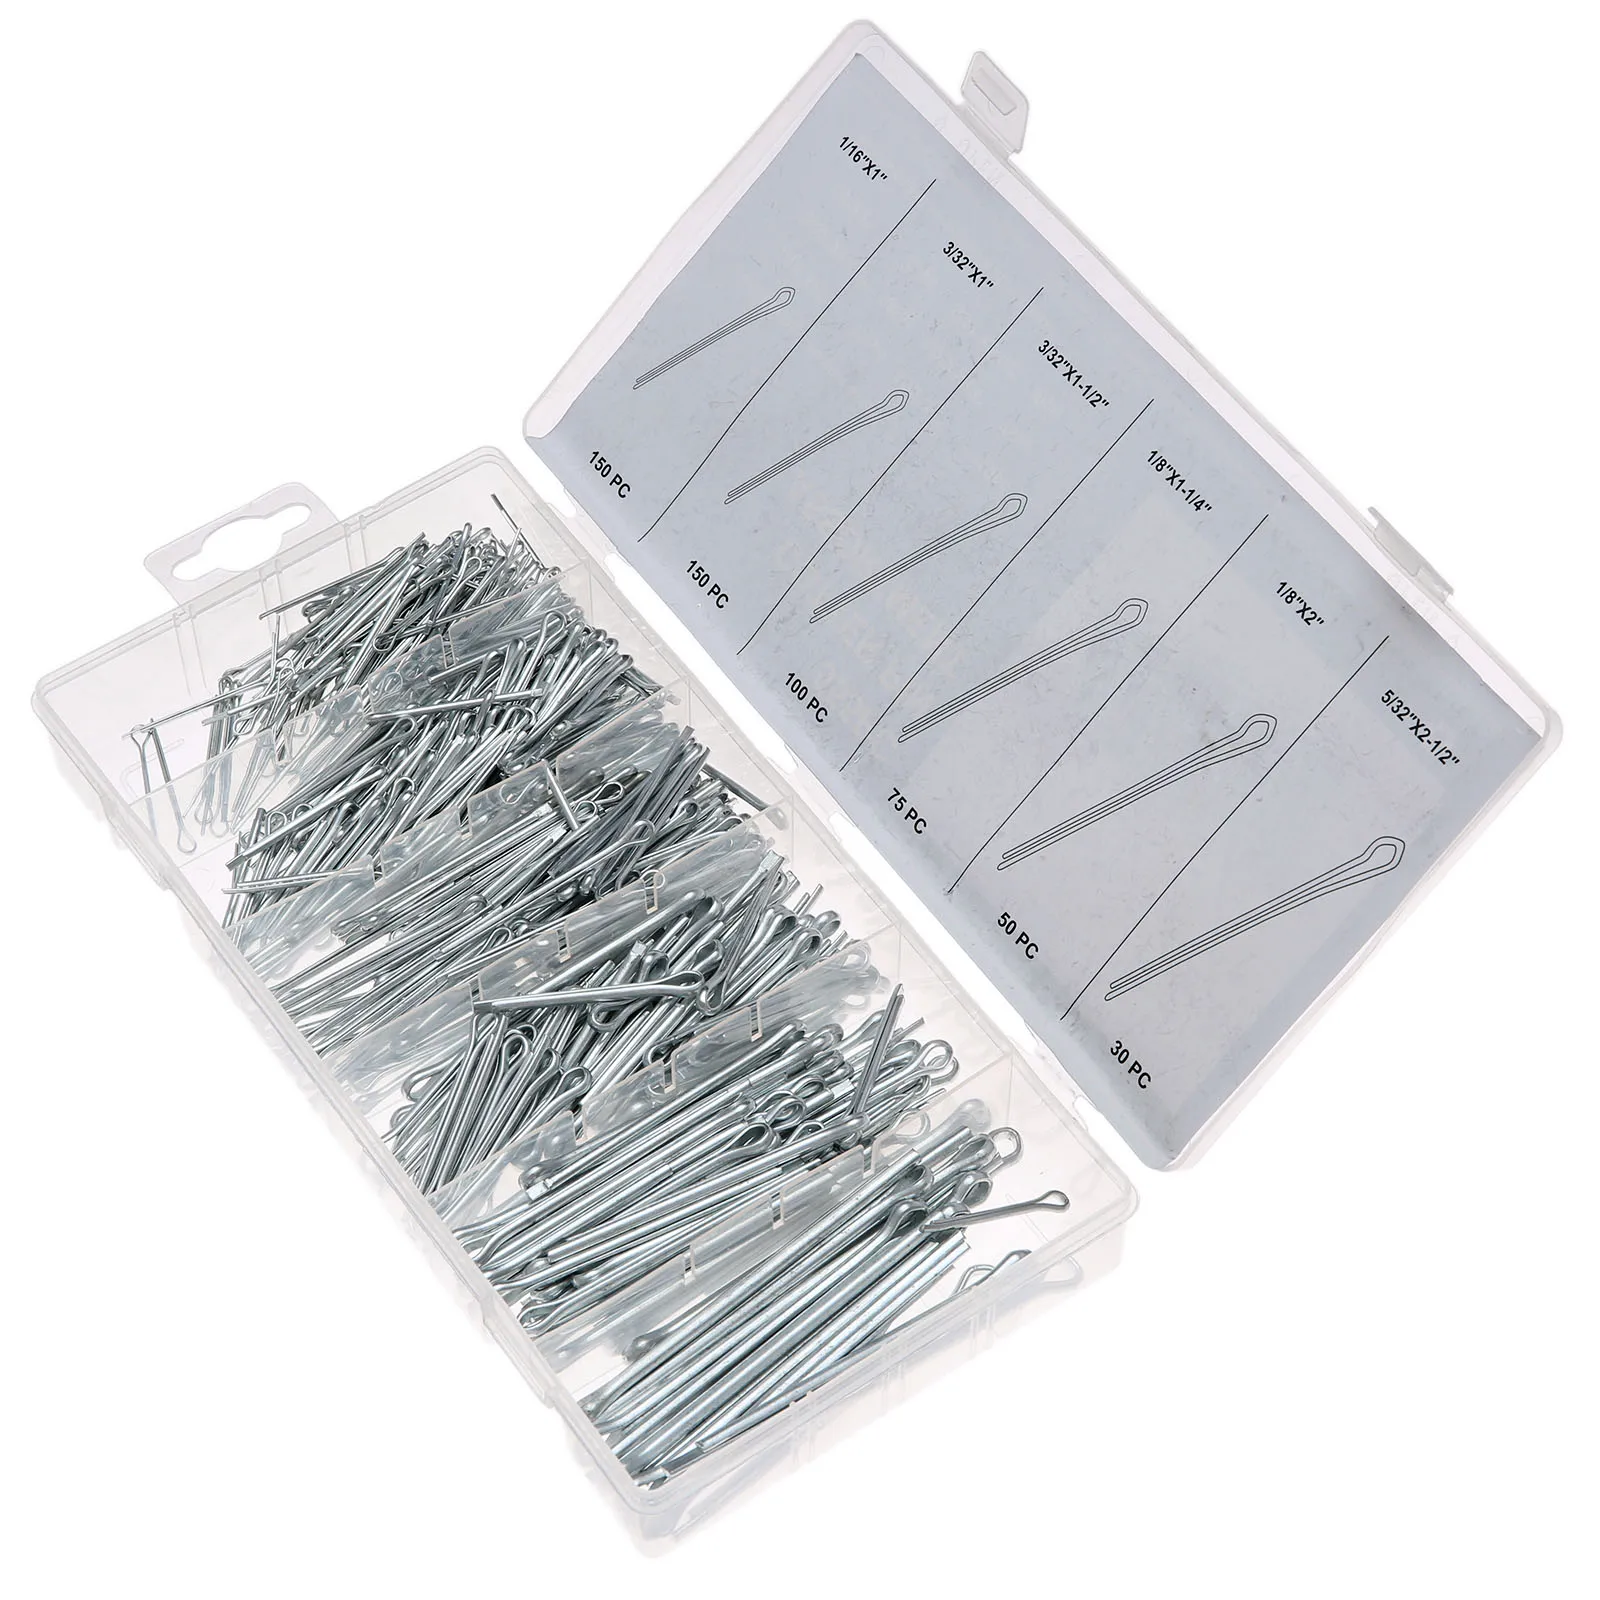 

555 Pcs Metal Split-Cotter Pins Mechanical Hitch Hair Tractor Fasteners Clips Set Fastening Pins Assortment Kit with Plastic Box